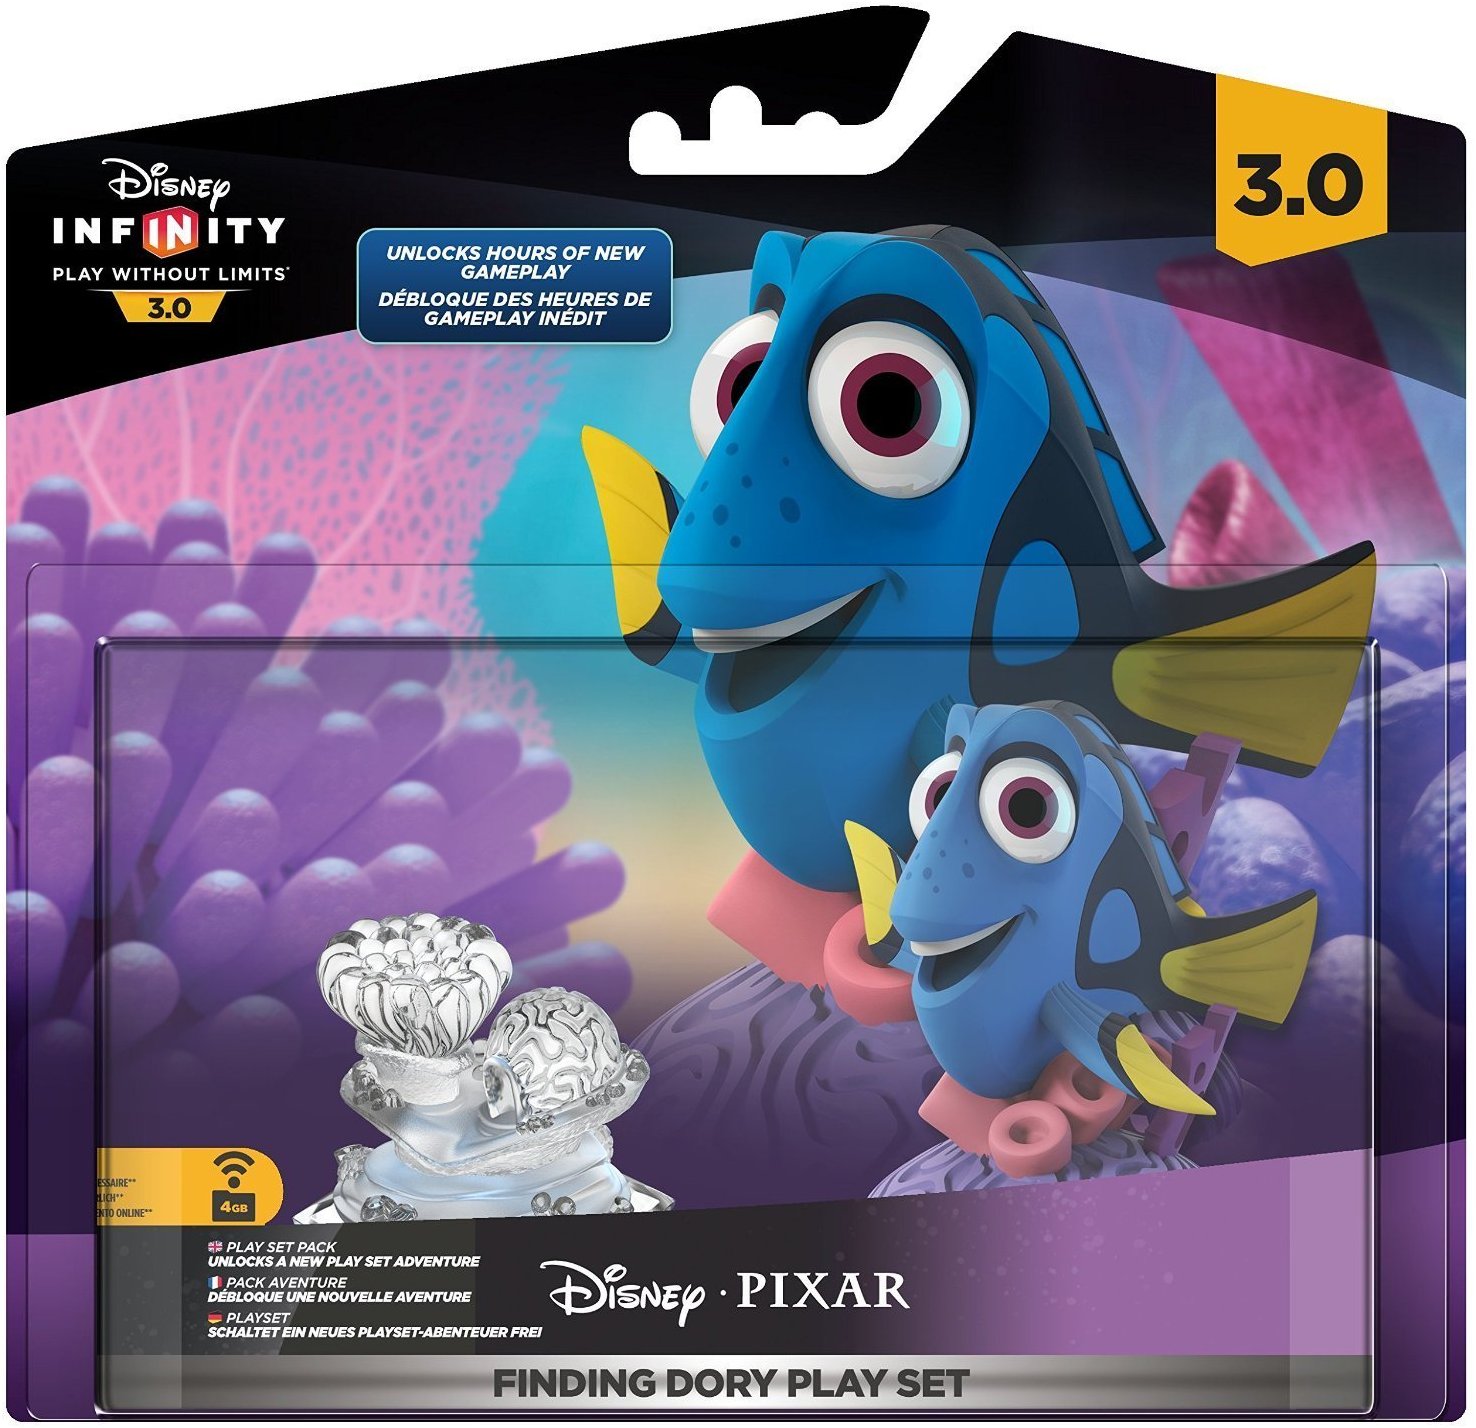 FIG: DISNEY INFINITY 3.0 - FINDING DORY PLAY SET (NEW)